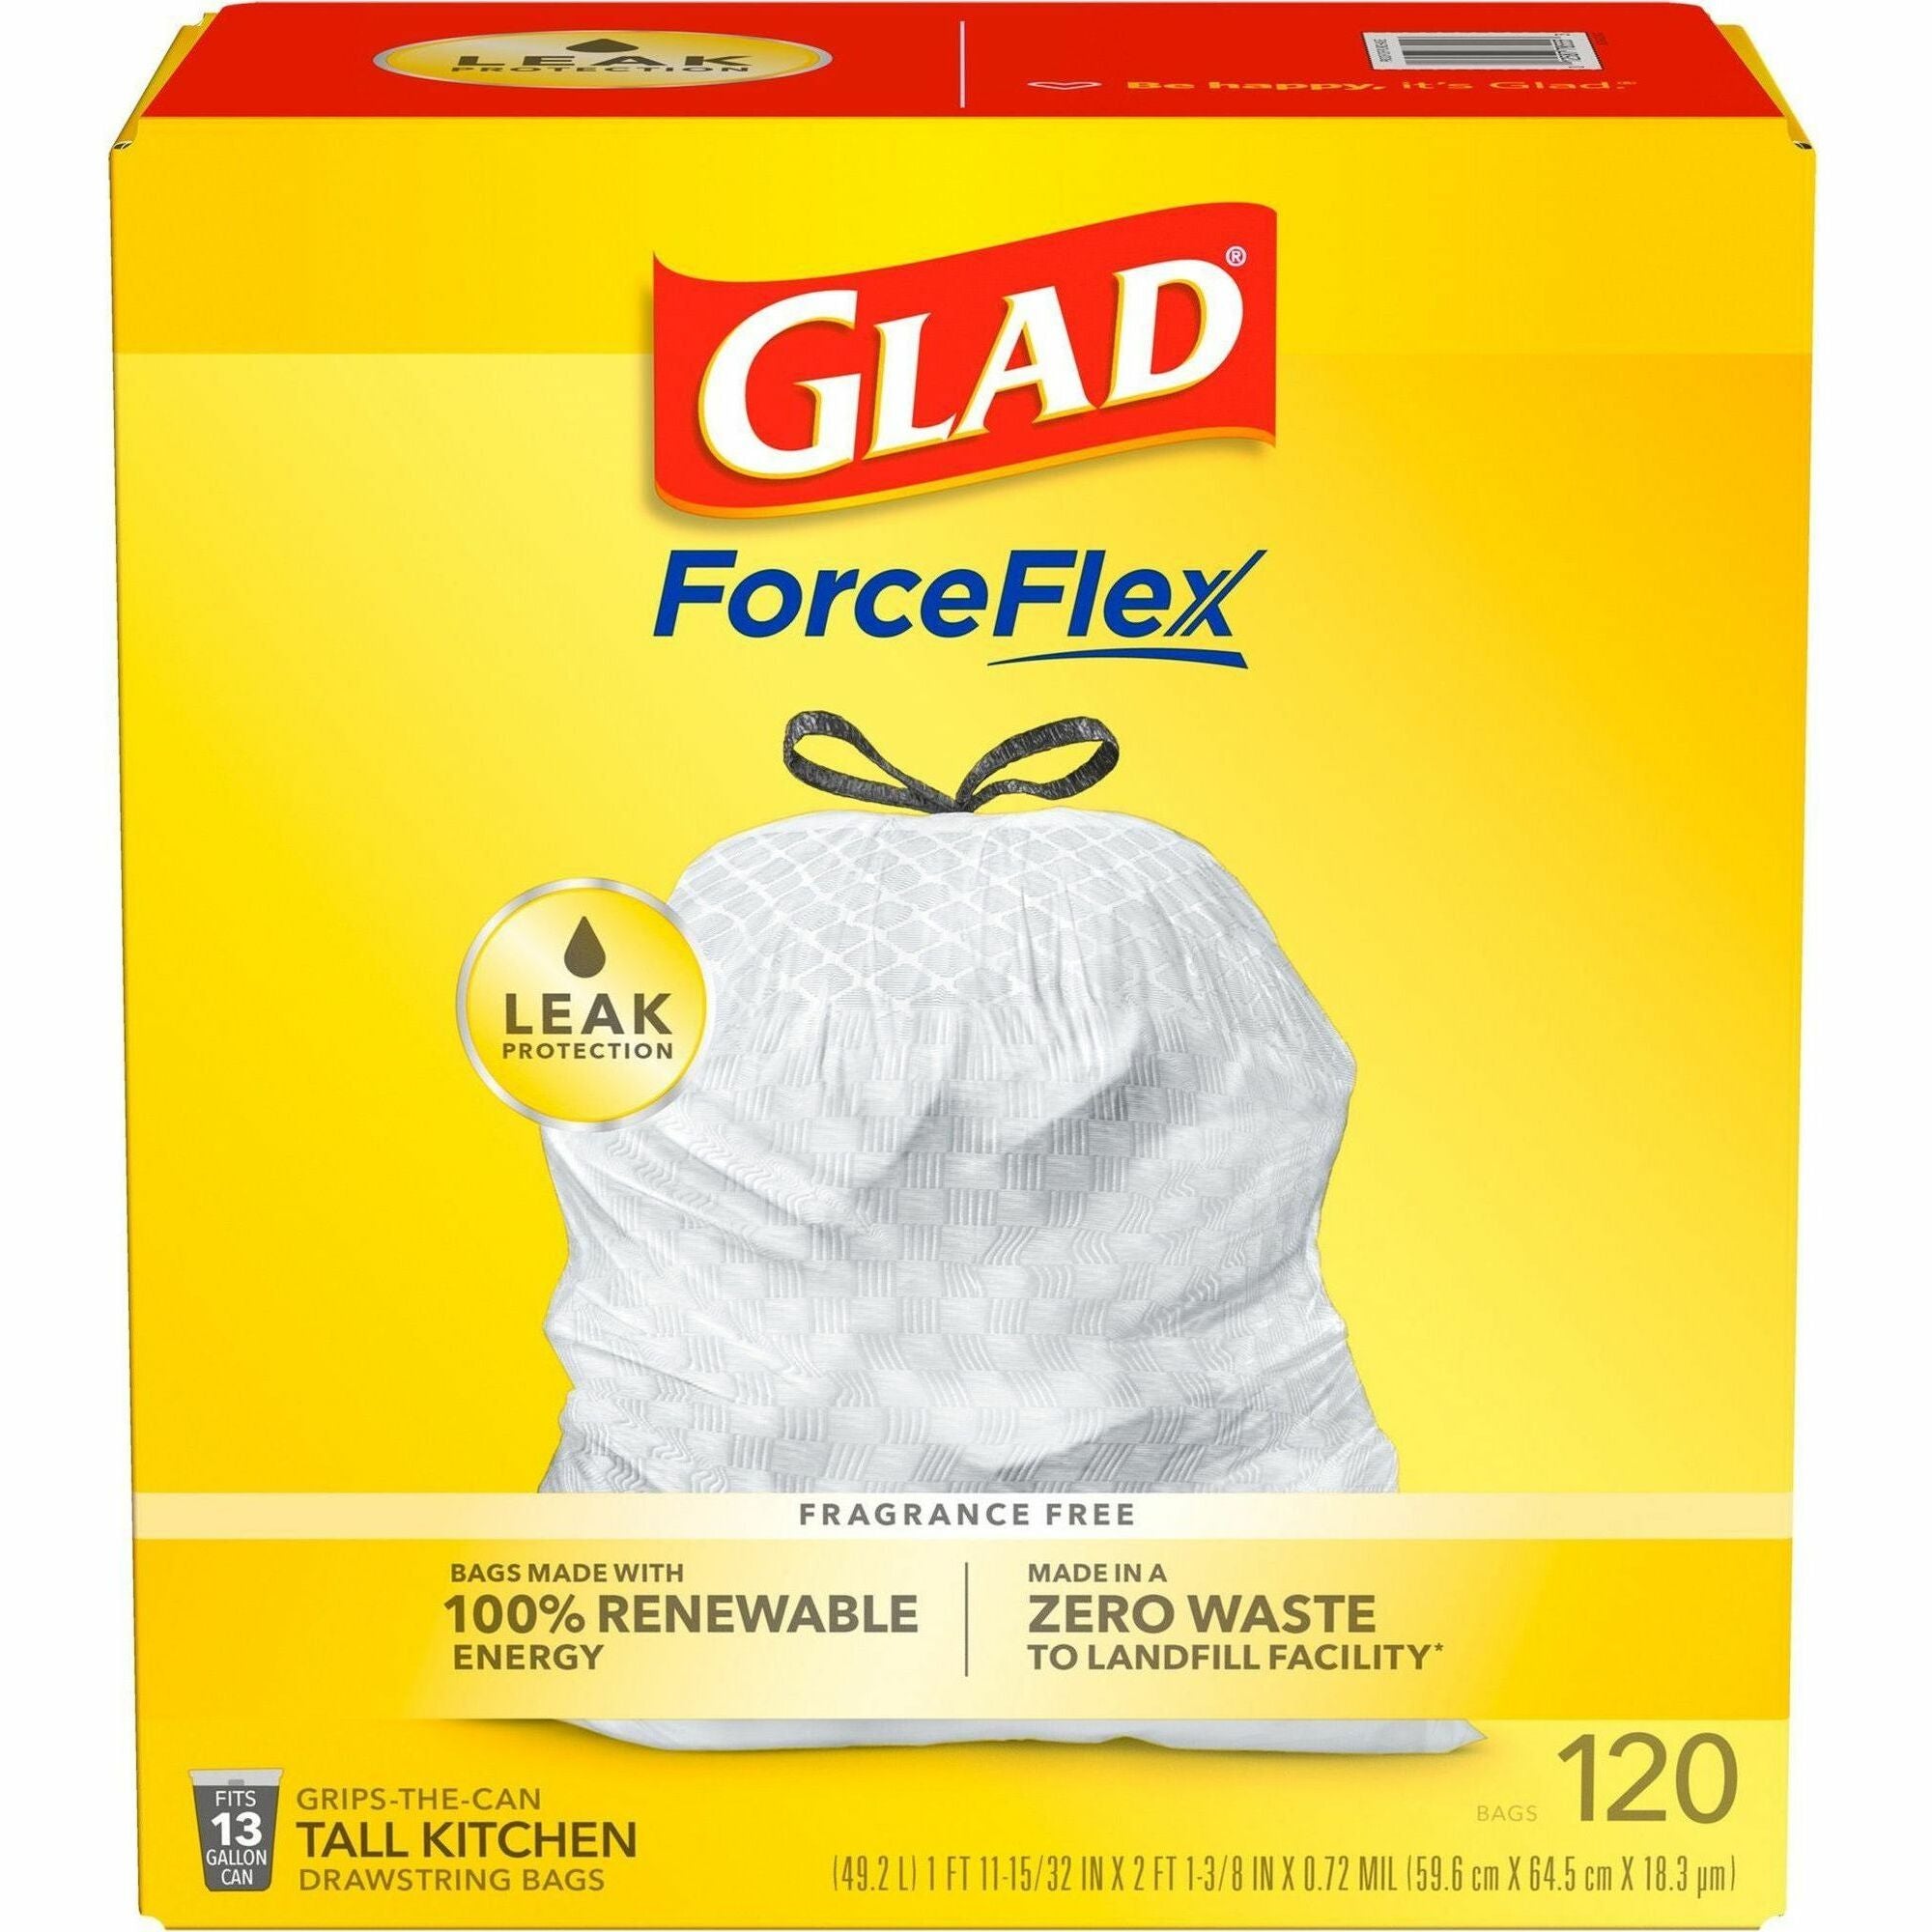 Glad ForceFlex Tall Kitchen Drawstring Trash Bags - 13 gal Capacity - 9 mil (229 Micron) Thickness - Drawstring Closure - White - Plastic - 3/Carton - 120 Per Box - Kitchen, Home, Breakroom, Day Care, Garbage - 1